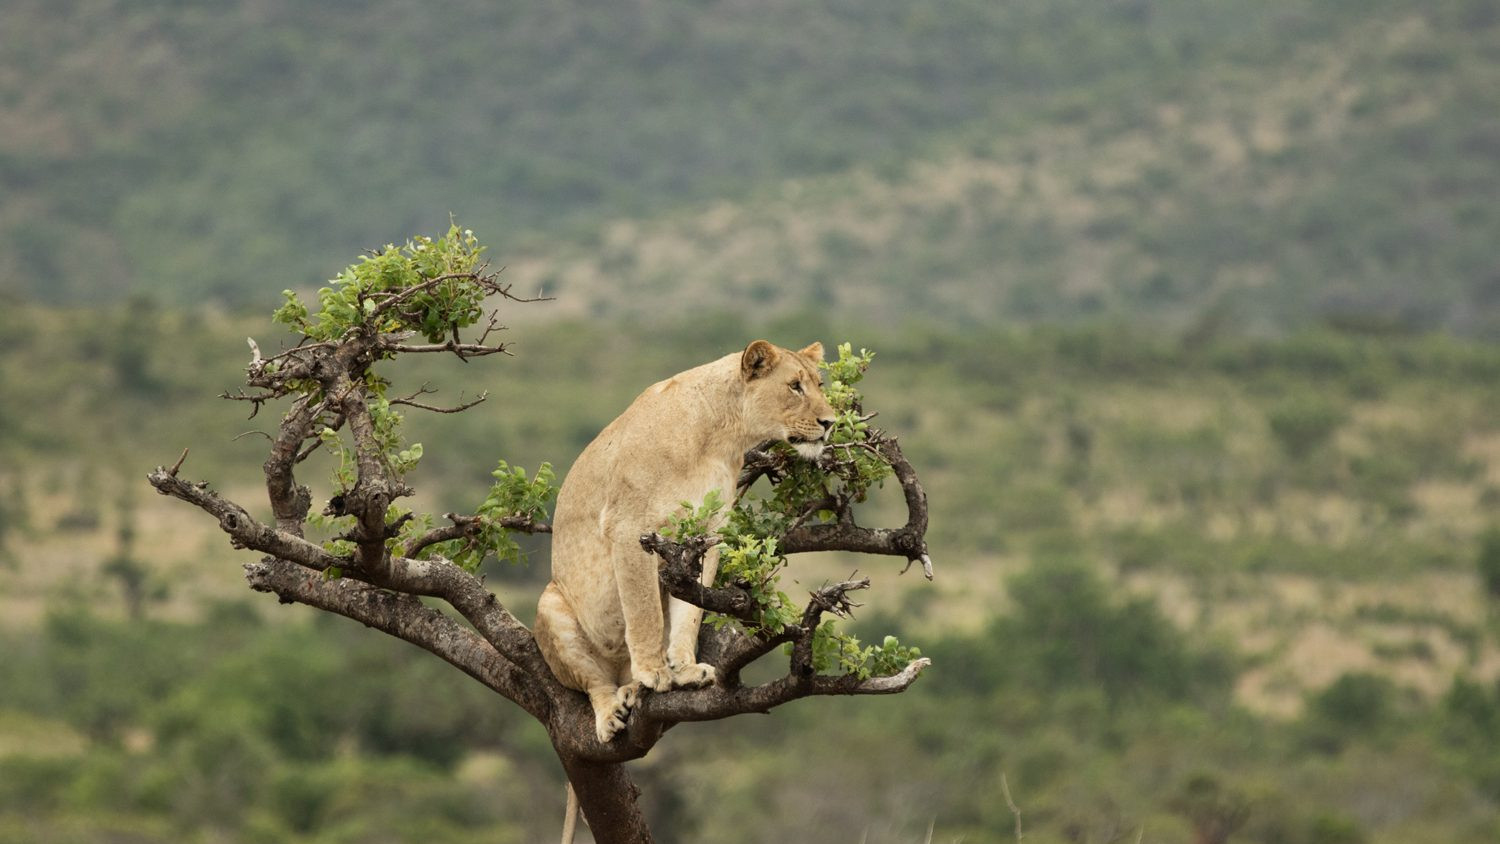 Akagera National Park: Lion in a tree